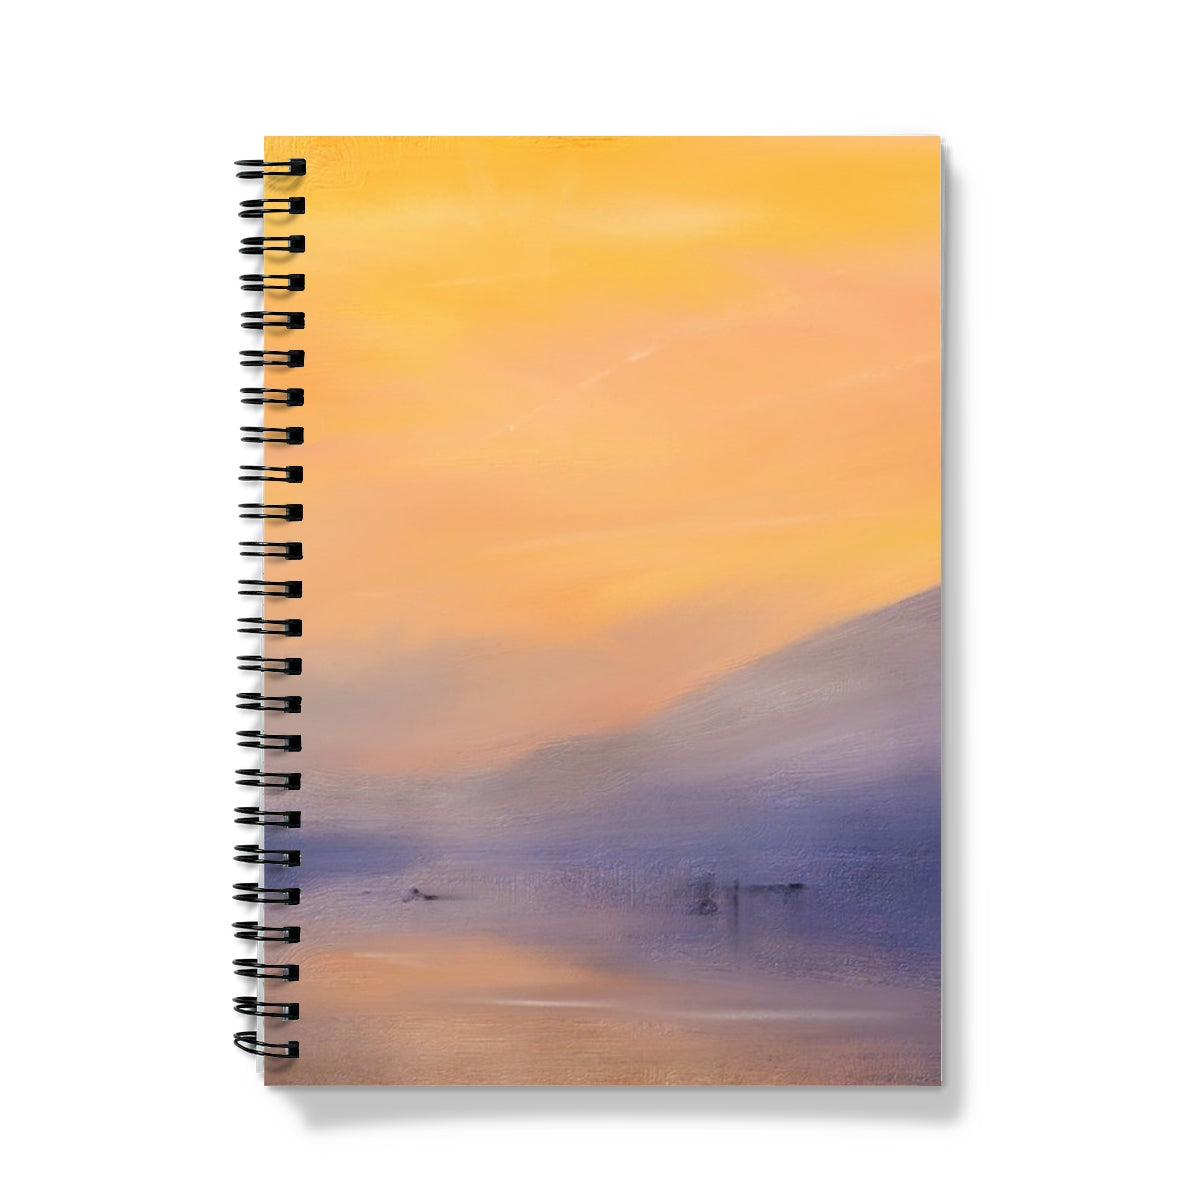 Loch Eck Dusk Art Gifts Notebook-Journals & Notebooks-Scottish Lochs & Mountains Art Gallery-A5-Graph-Paintings, Prints, Homeware, Art Gifts From Scotland By Scottish Artist Kevin Hunter